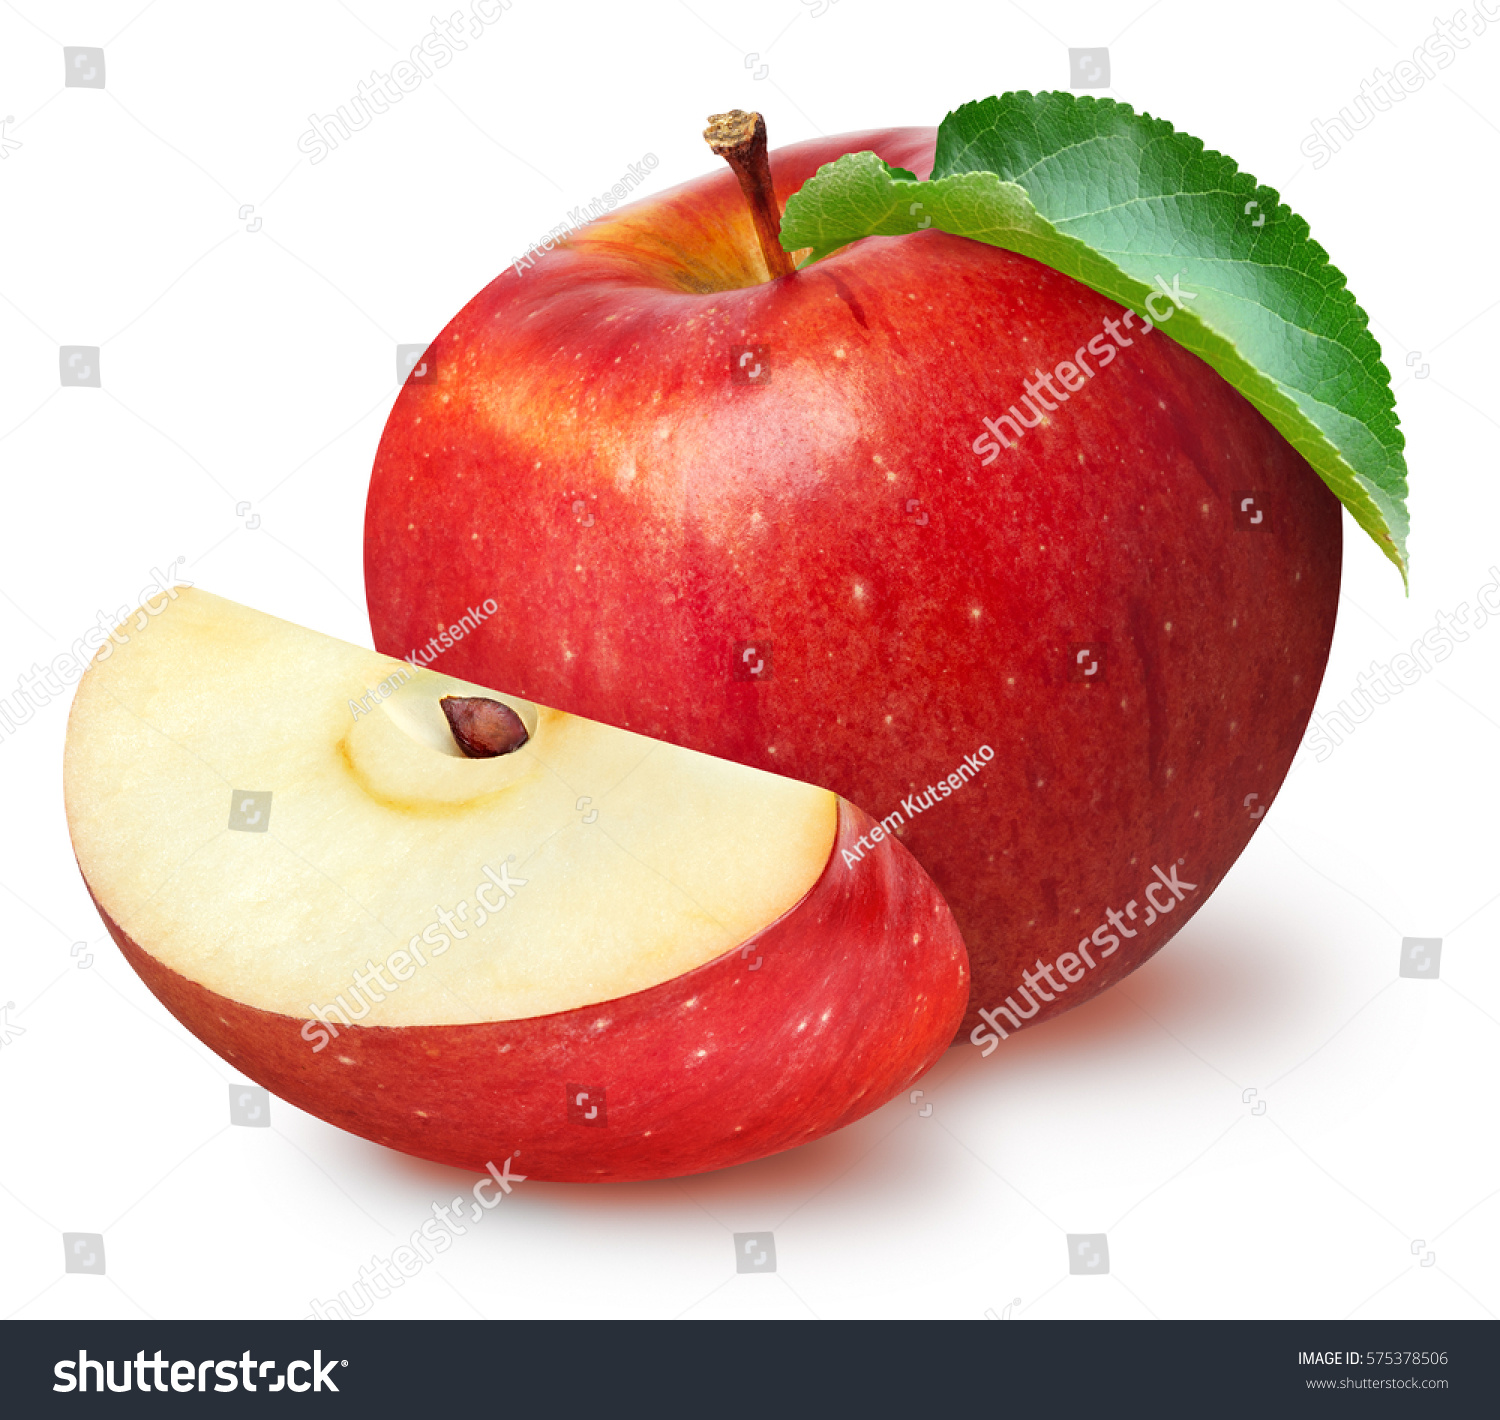 Isolated apples. Whole red apple fruit with slice (cut) isolated on white with clipping path #575378506